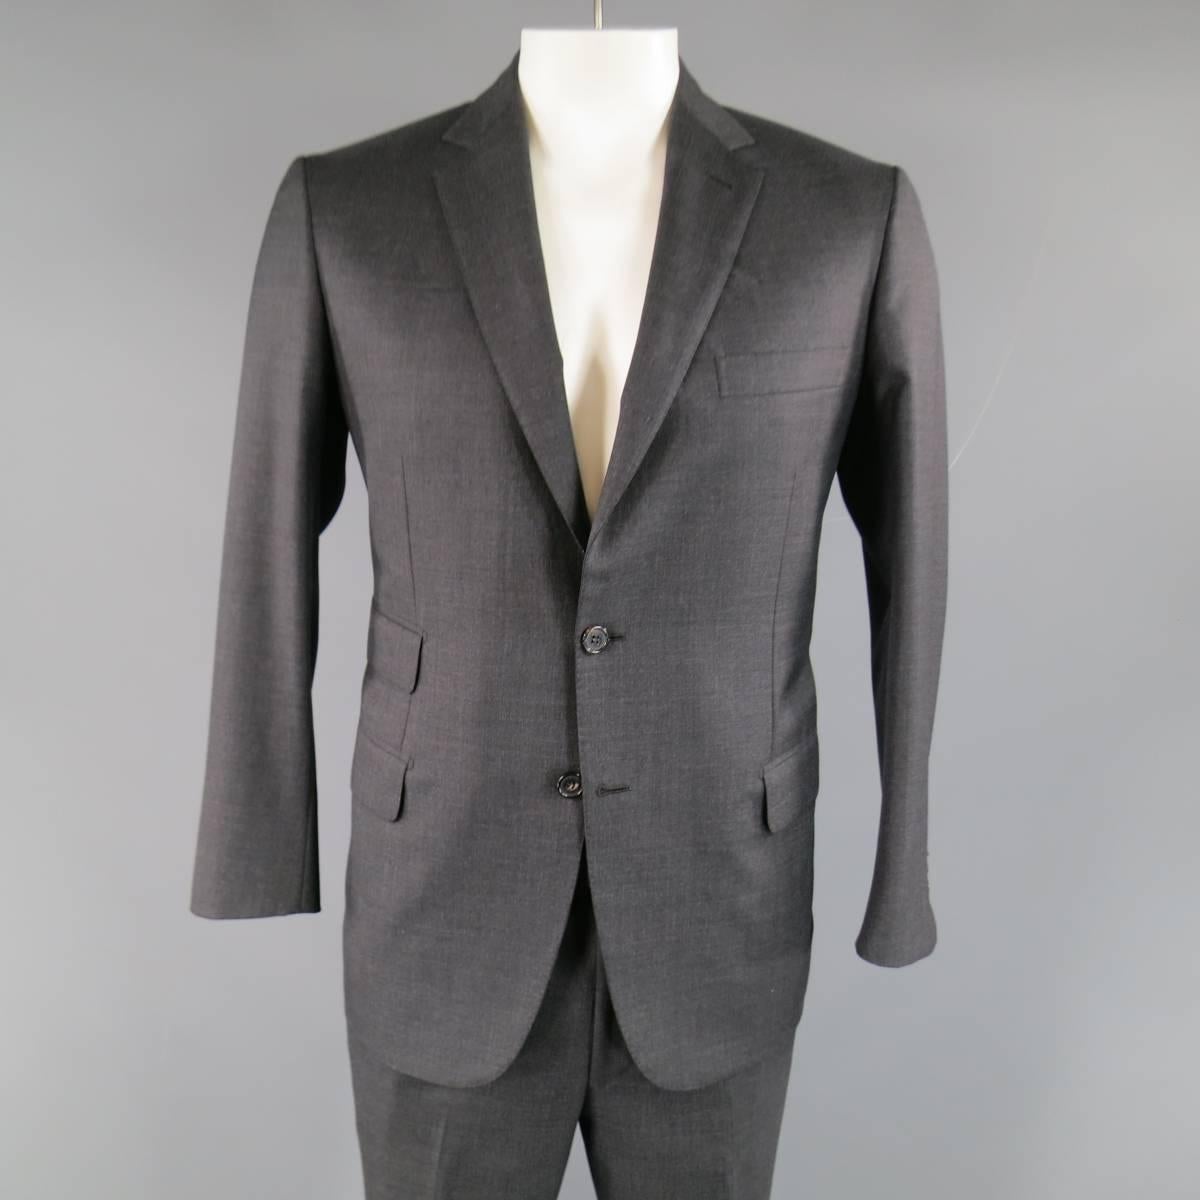 Modern Classic BRIONI for WILKES BASHFORD two piece suit in charcoal textured wool includes a two button, notch lapel sport coat with triple flap pockets, functional button cuff sleeves, and double vented back with matching flat front, cuffed hem